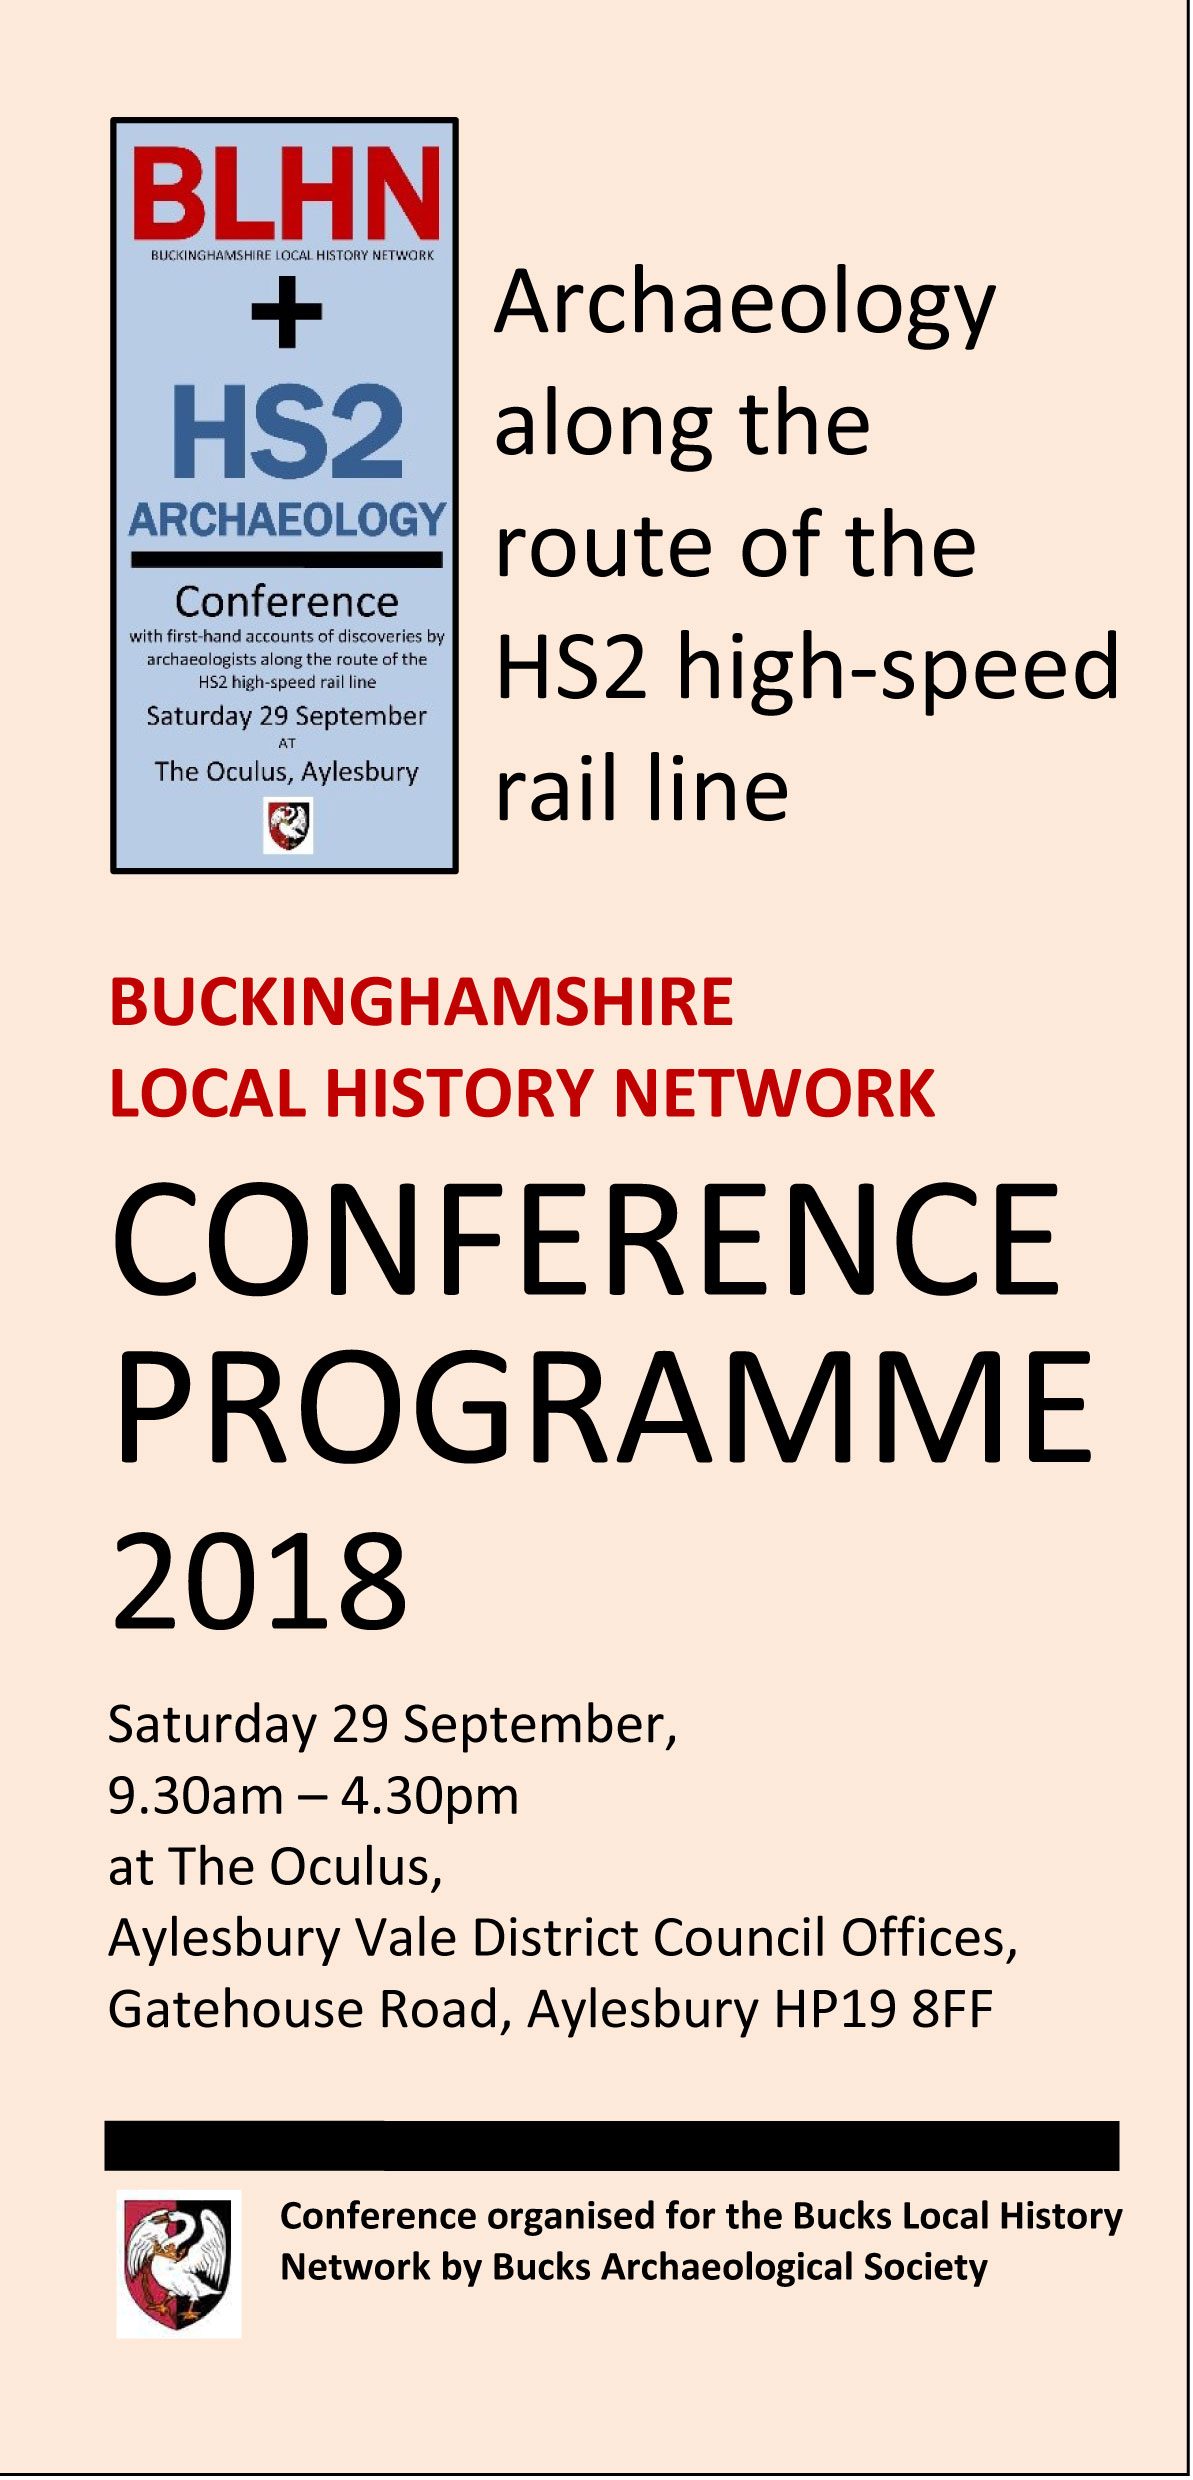 The BLHN 2018 conference programme